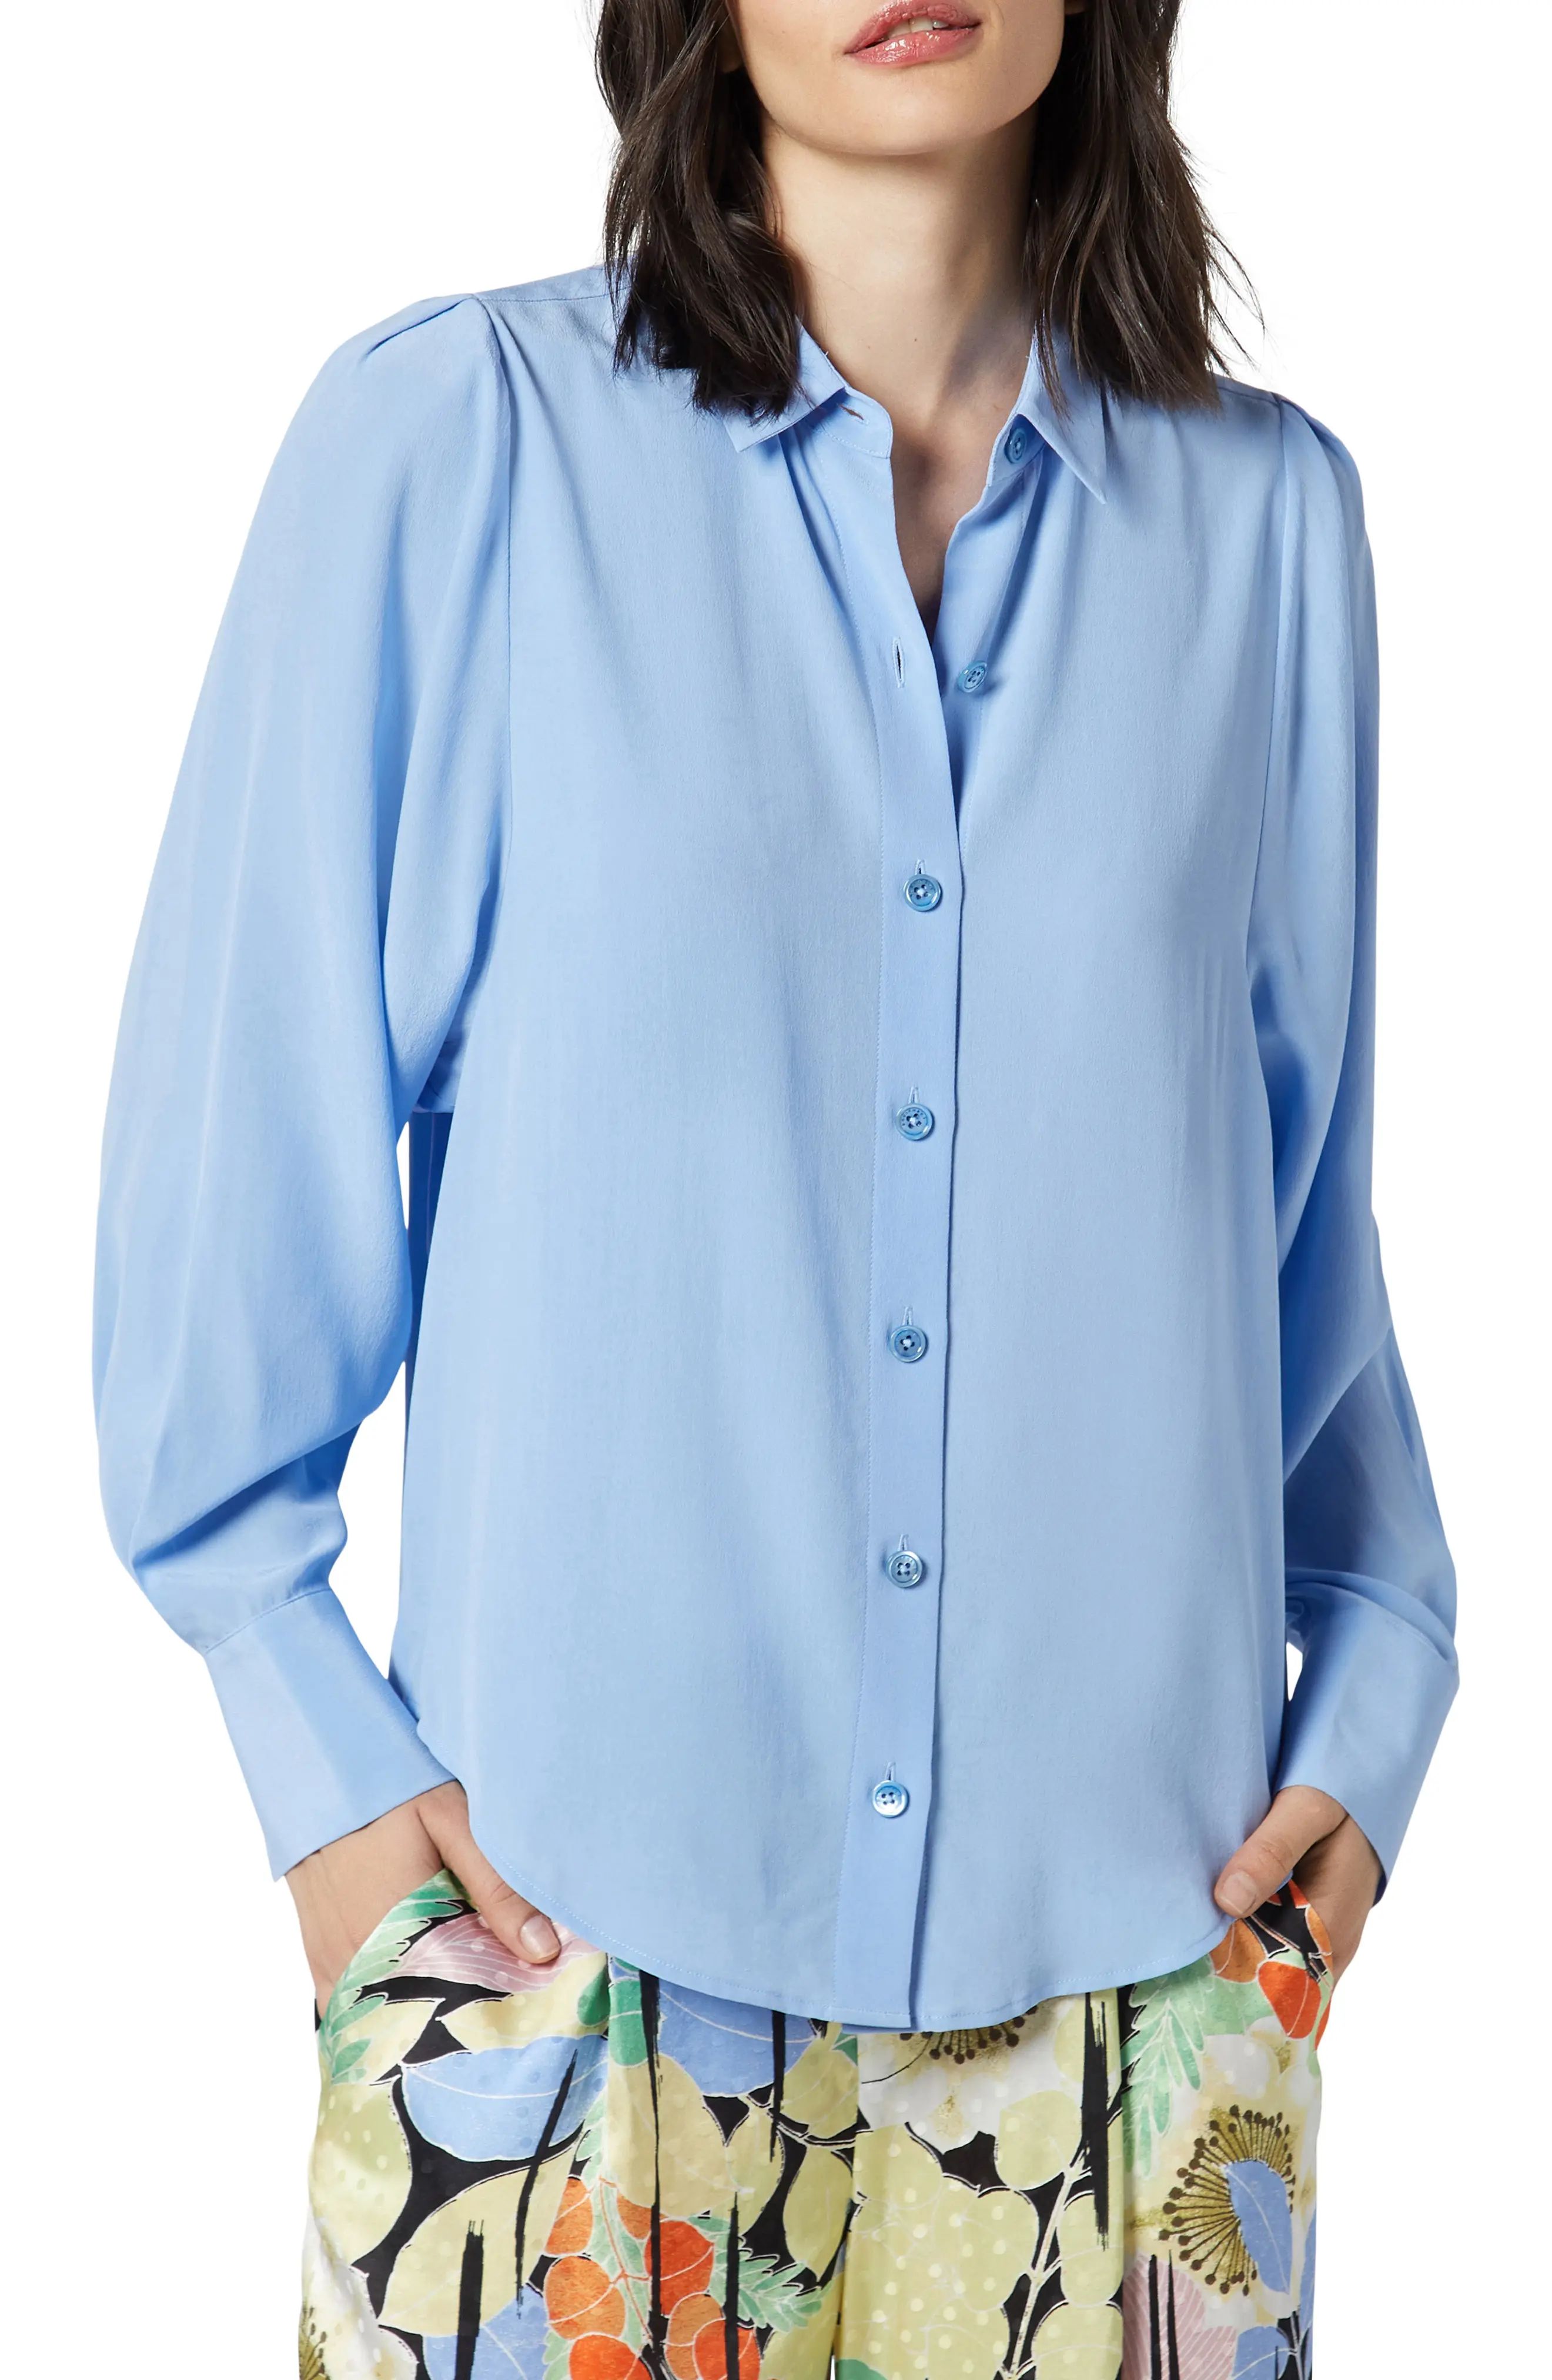 Equipment Shanton Silk Blouse in Della Robbia at Nordstrom, Size Large | Nordstrom